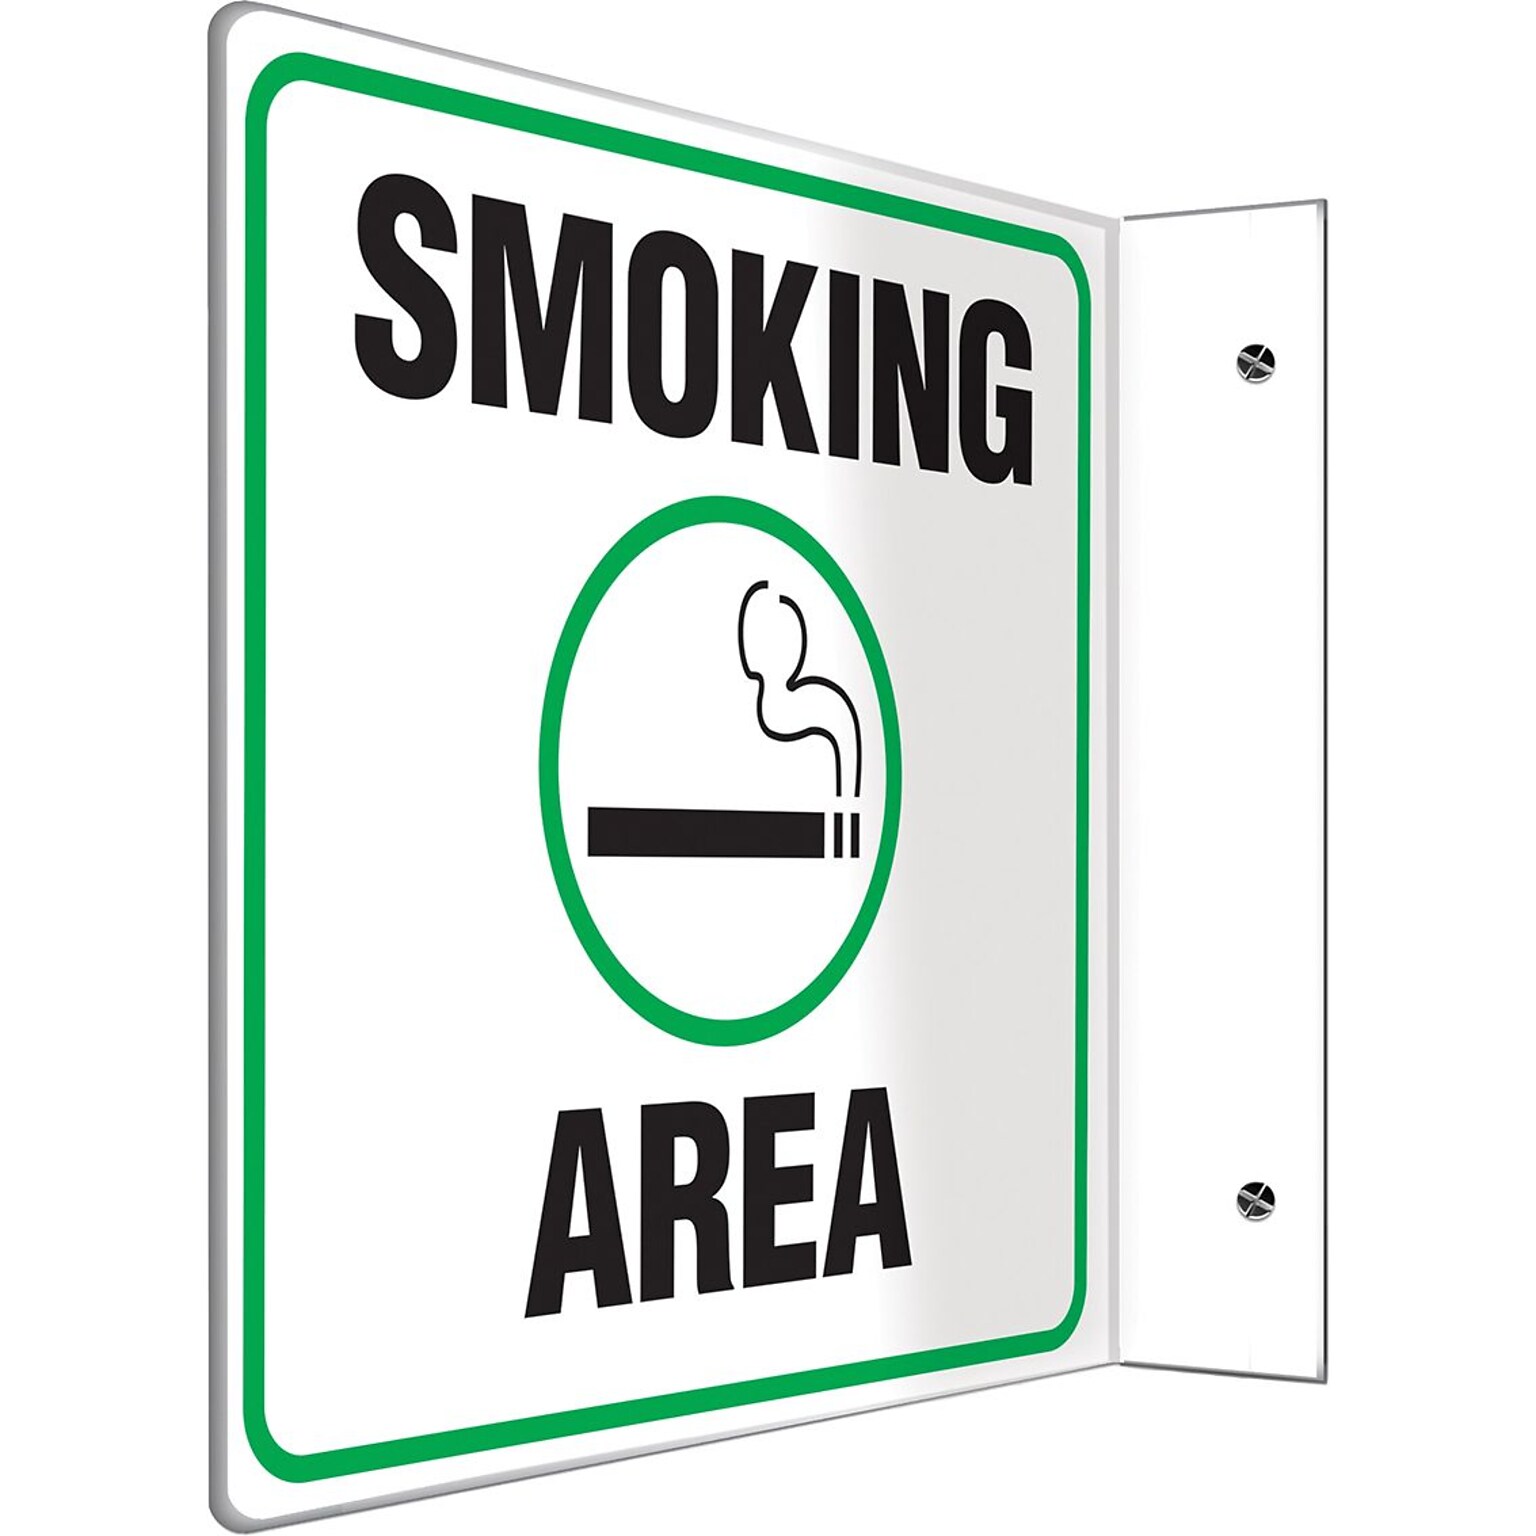 Accuform Smoking Area Projection Sign, Green/Black/White, 8H x 8W (PSP495)